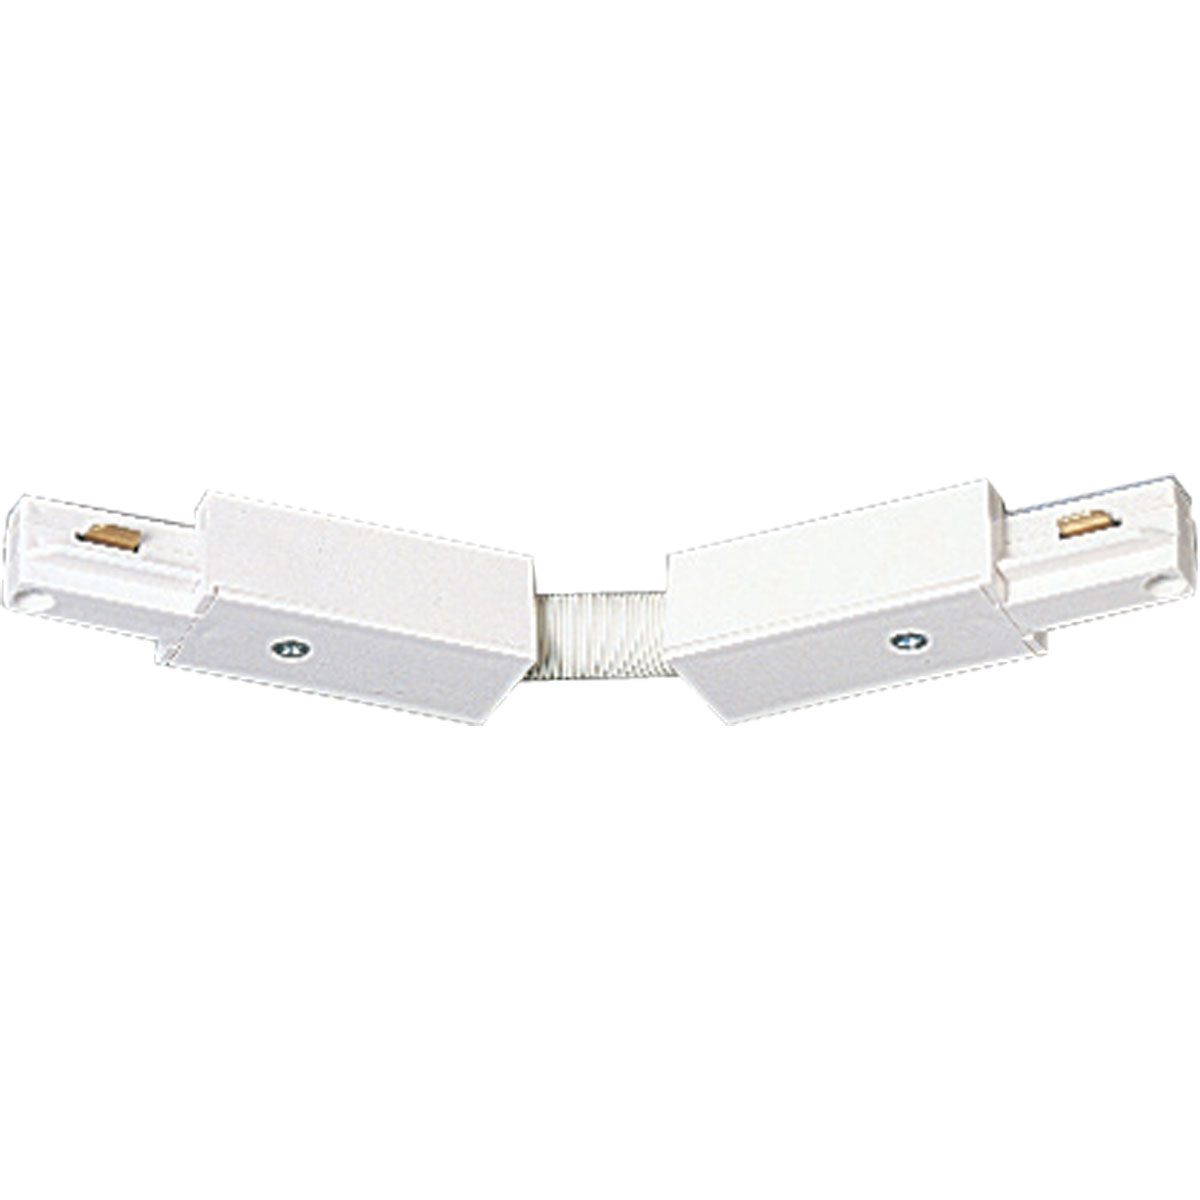 Flex Connector. Permits a variety of track layouts at almost any angle and variation of planes including wall-to-ceiling or on cathedral ceilings. Can flex to 90 degrees. White finish.